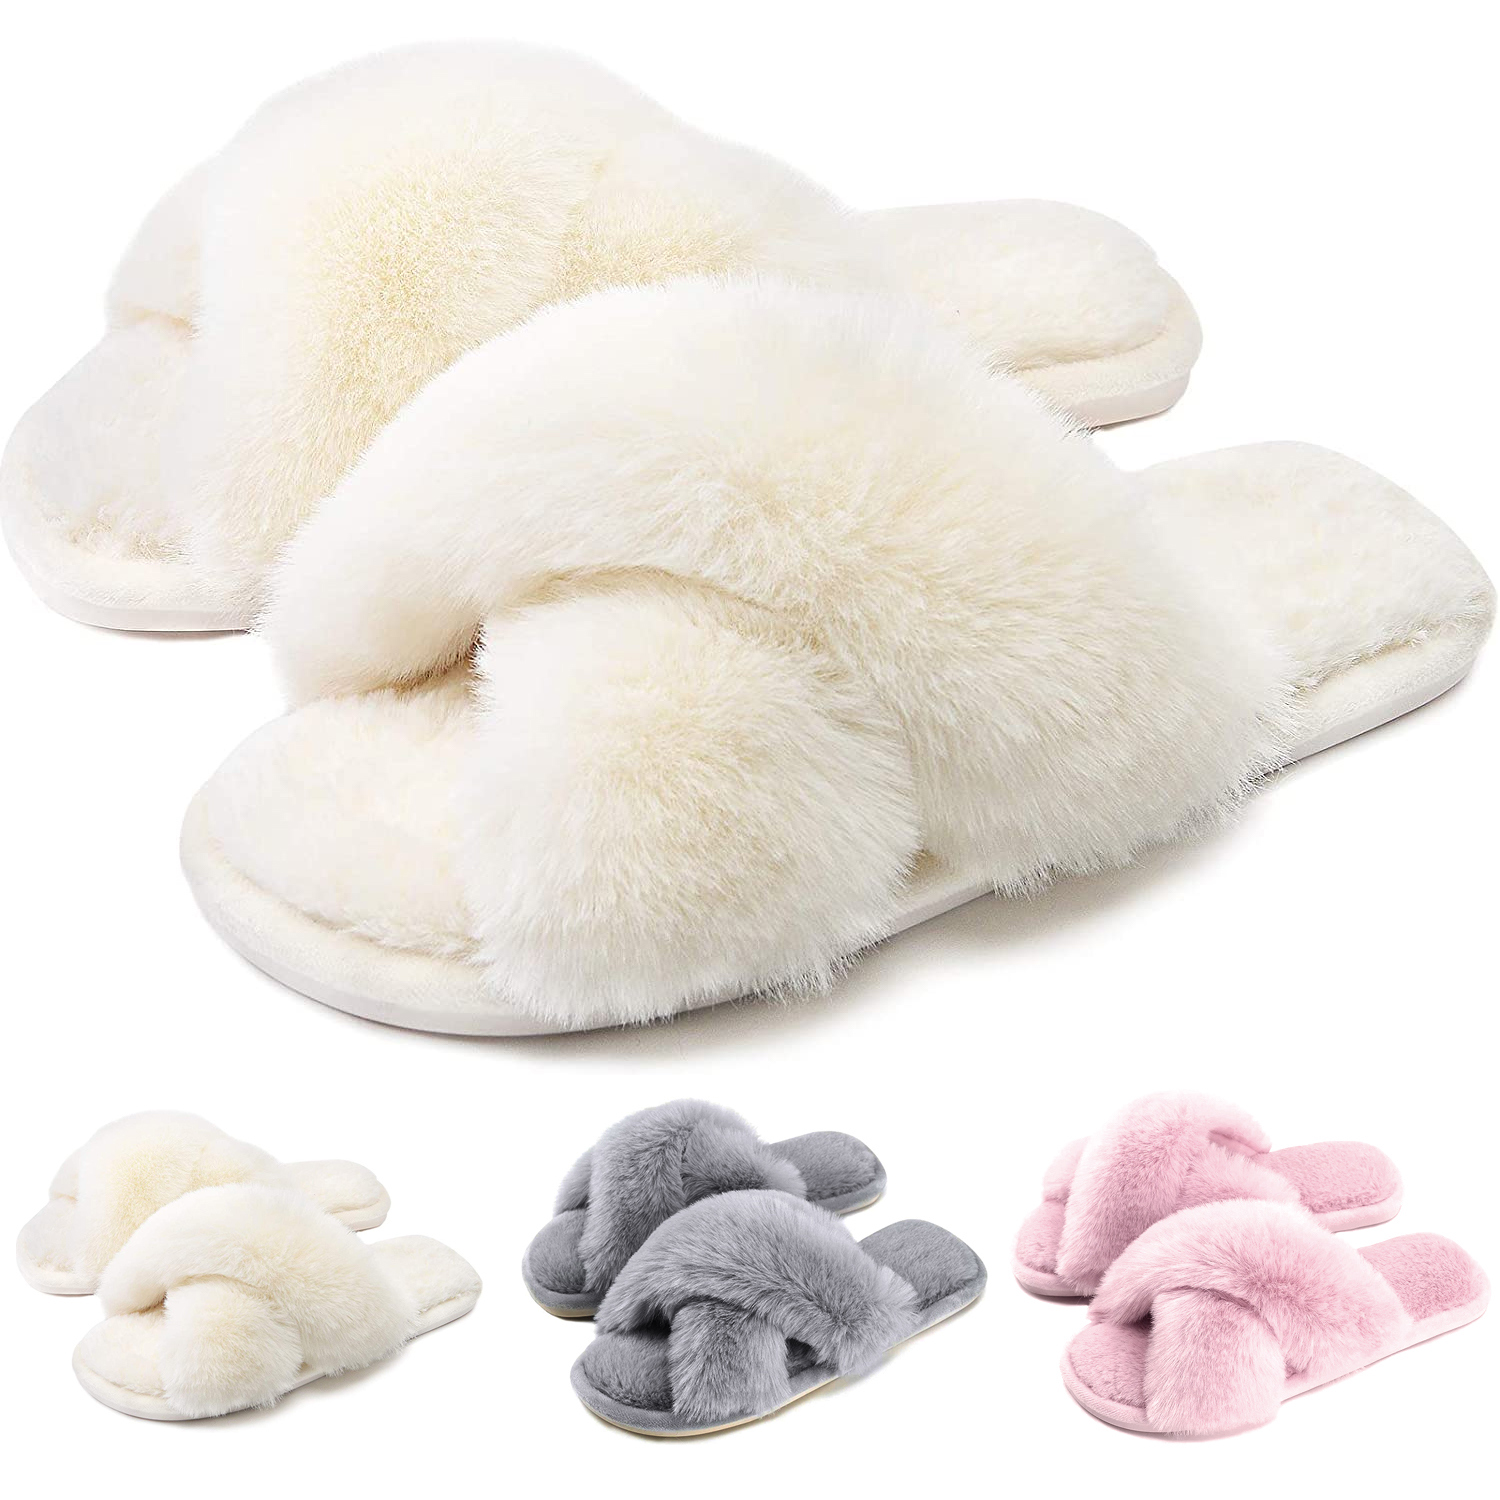 Women's Cross Band Slippers Soft Plush Furry Cozy Open Toe House Shoes Indoor Outdoor Faux Rabbit Fur Warm Comfy Slip On Breathable - image 1 of 7